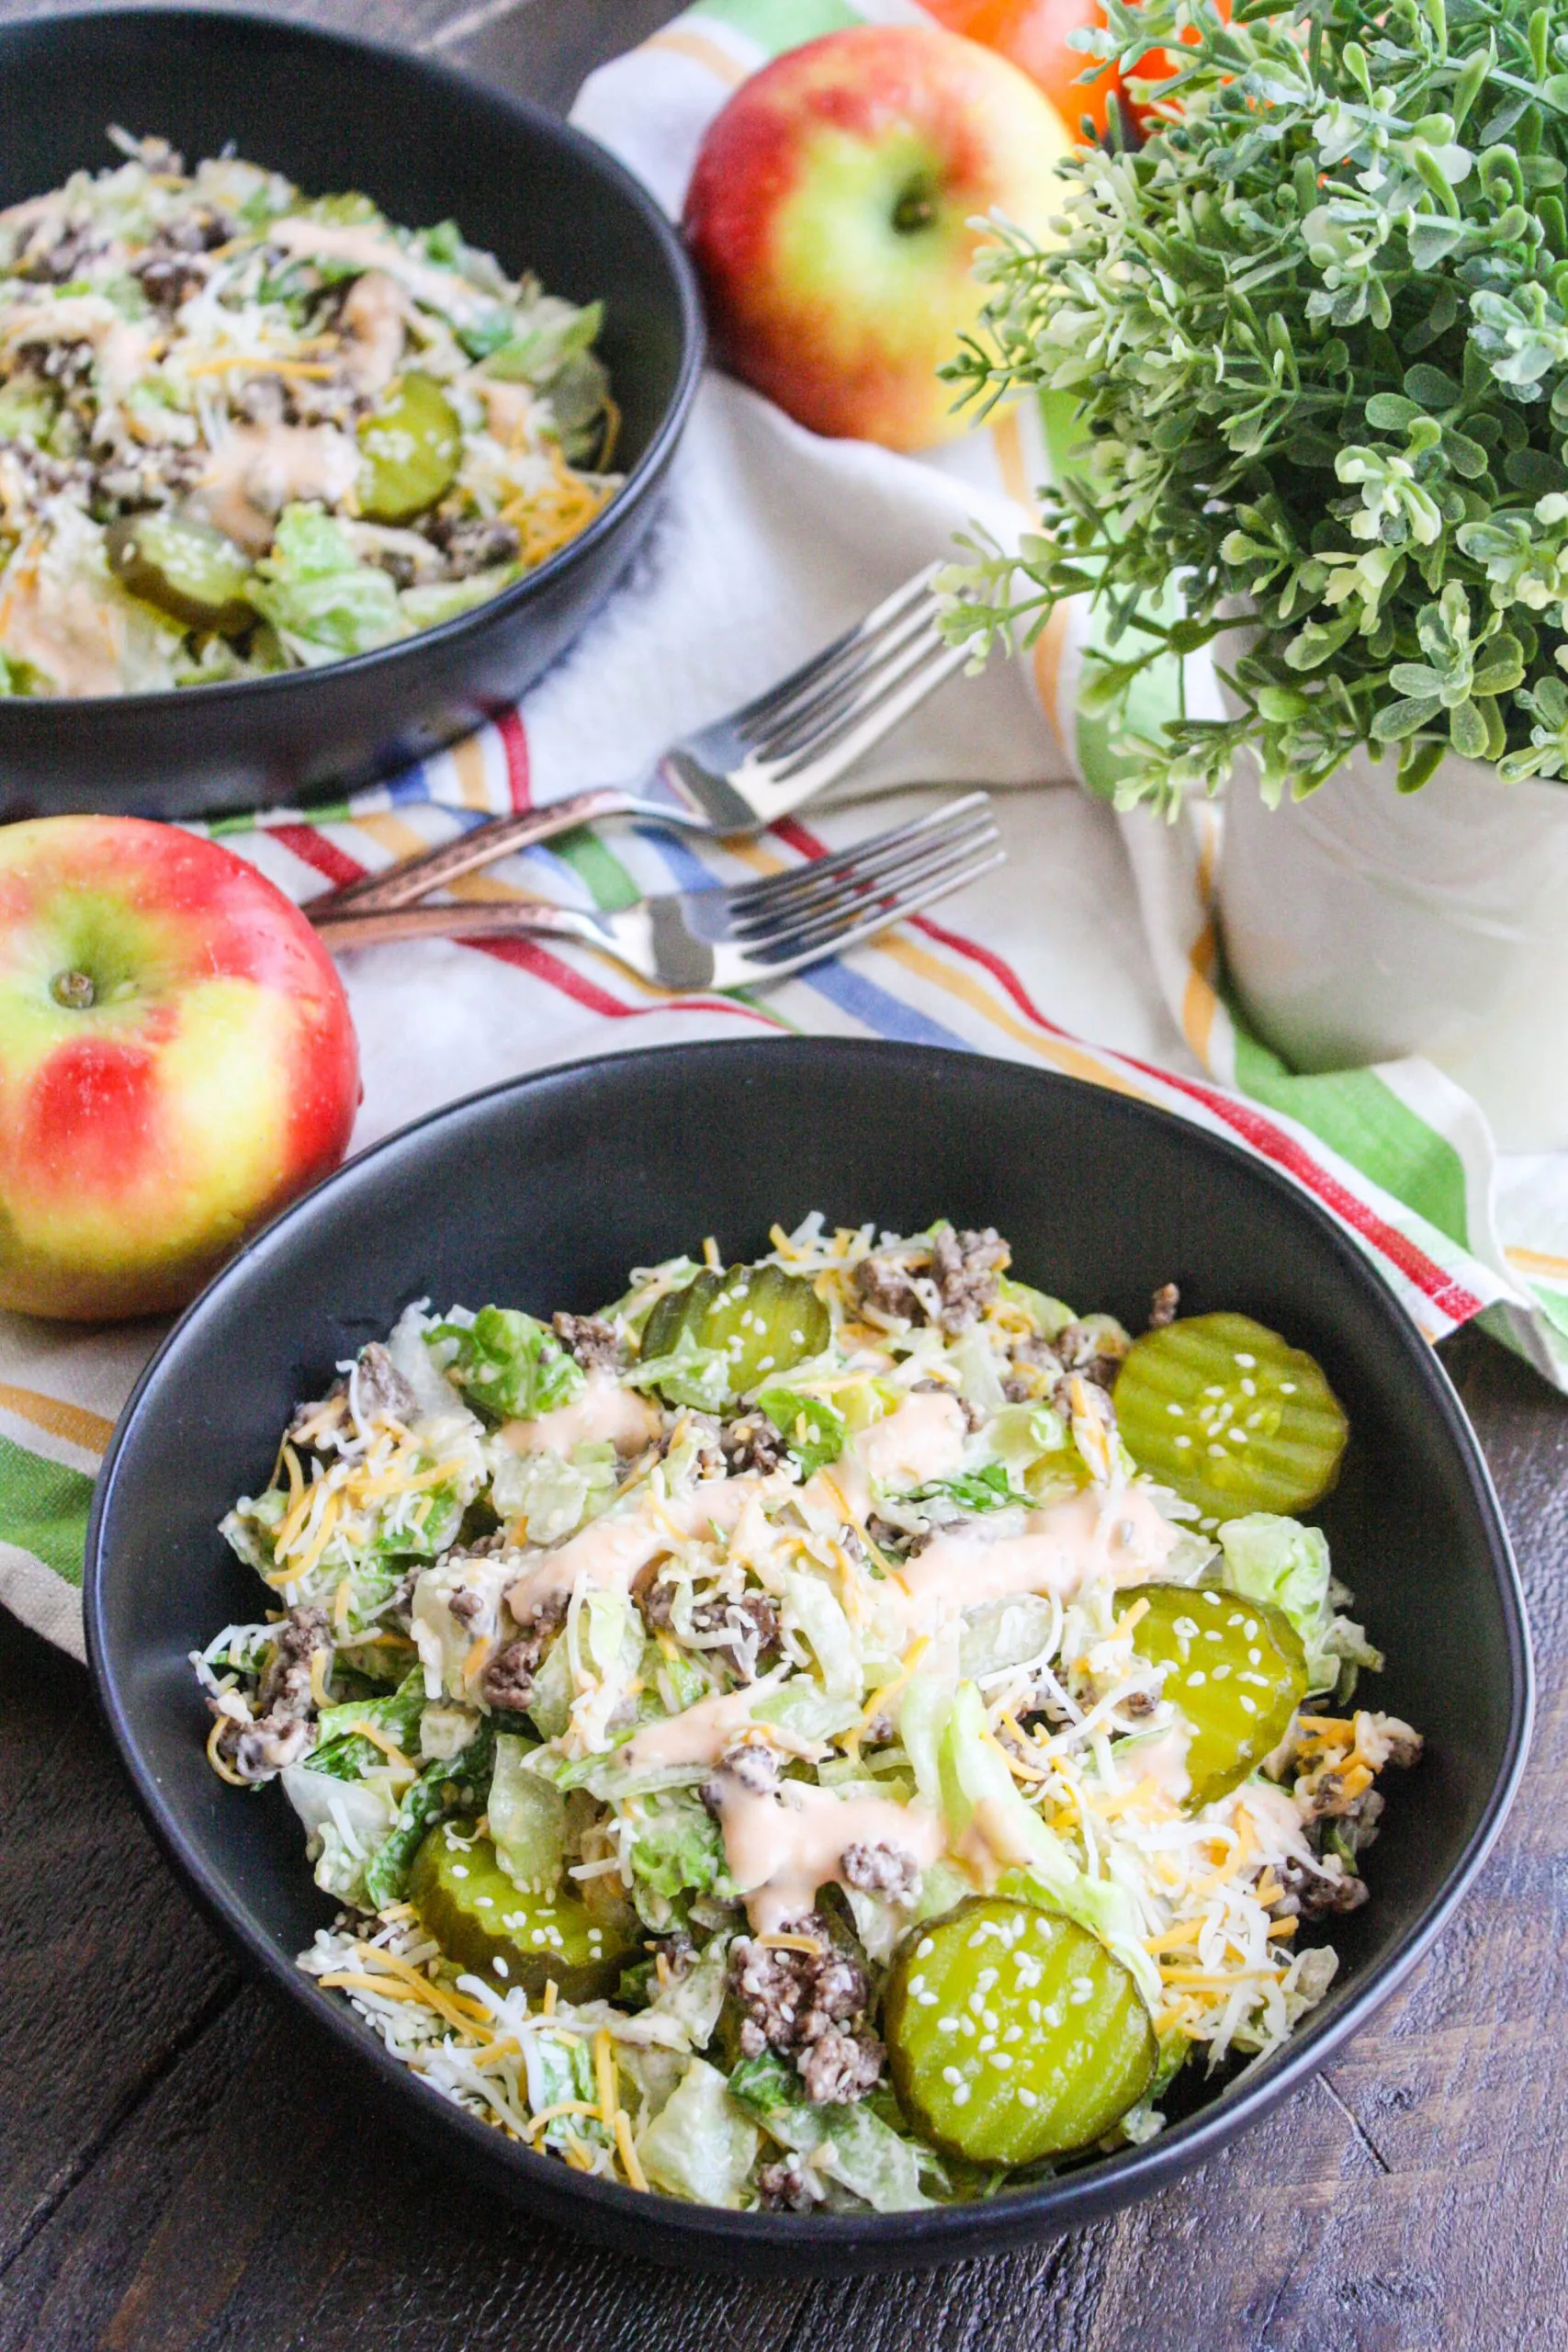 Easy “Big Mac” Salad is a fun dish to serve when you're craving fast food!